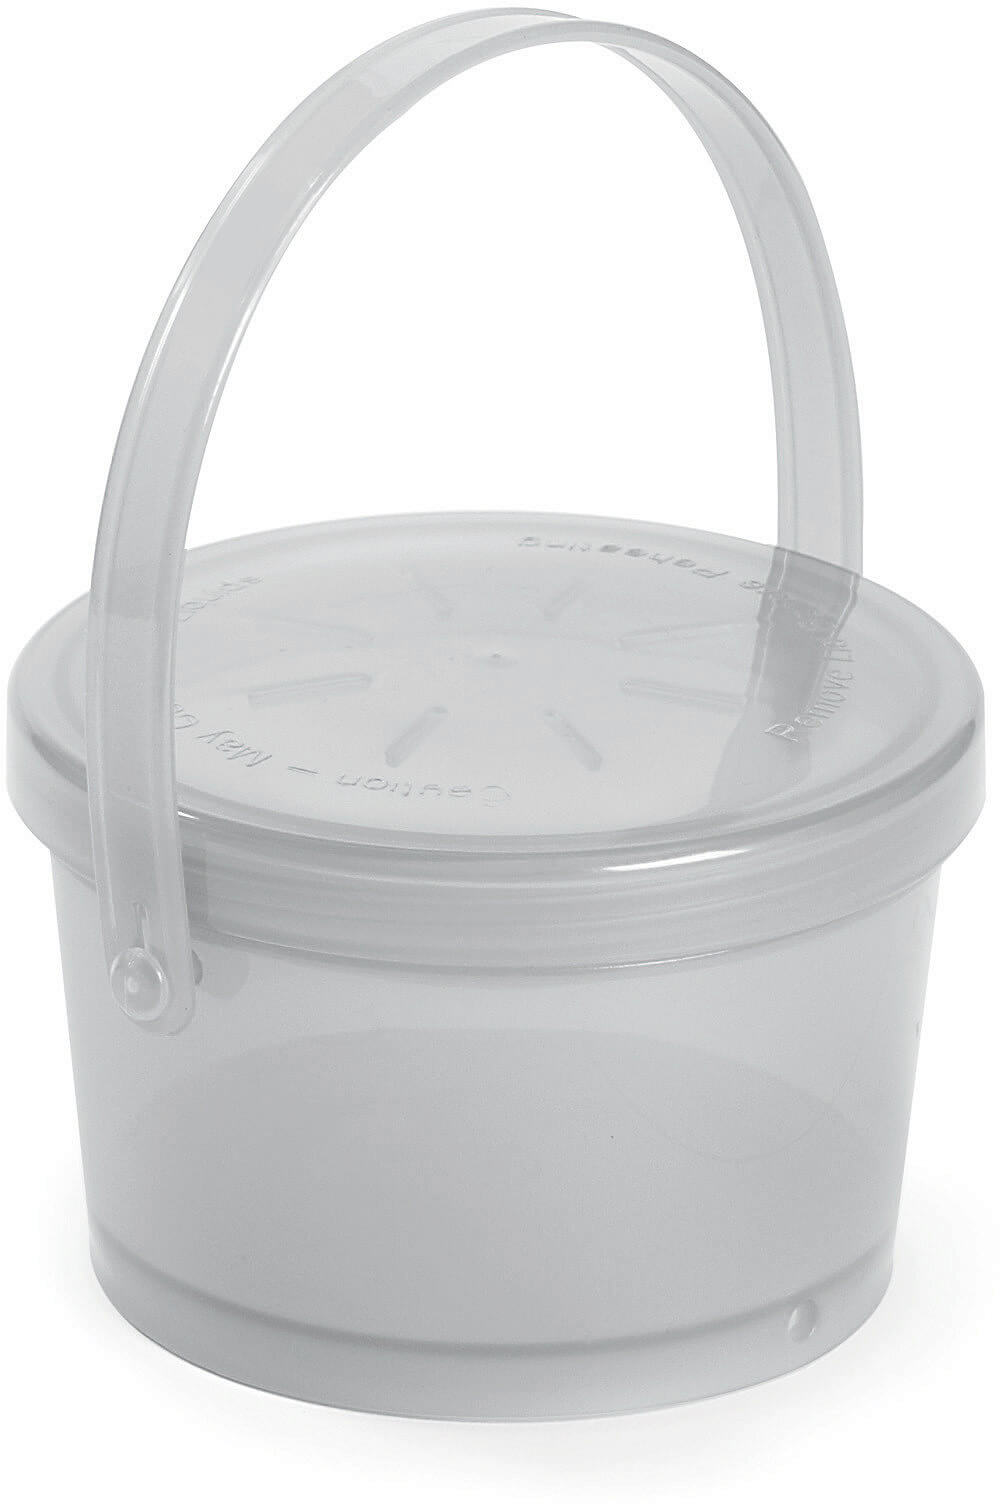 Jade Eco-Takeouts 12 oz. Soup Container by G.E.T. - EC-07-1-JA